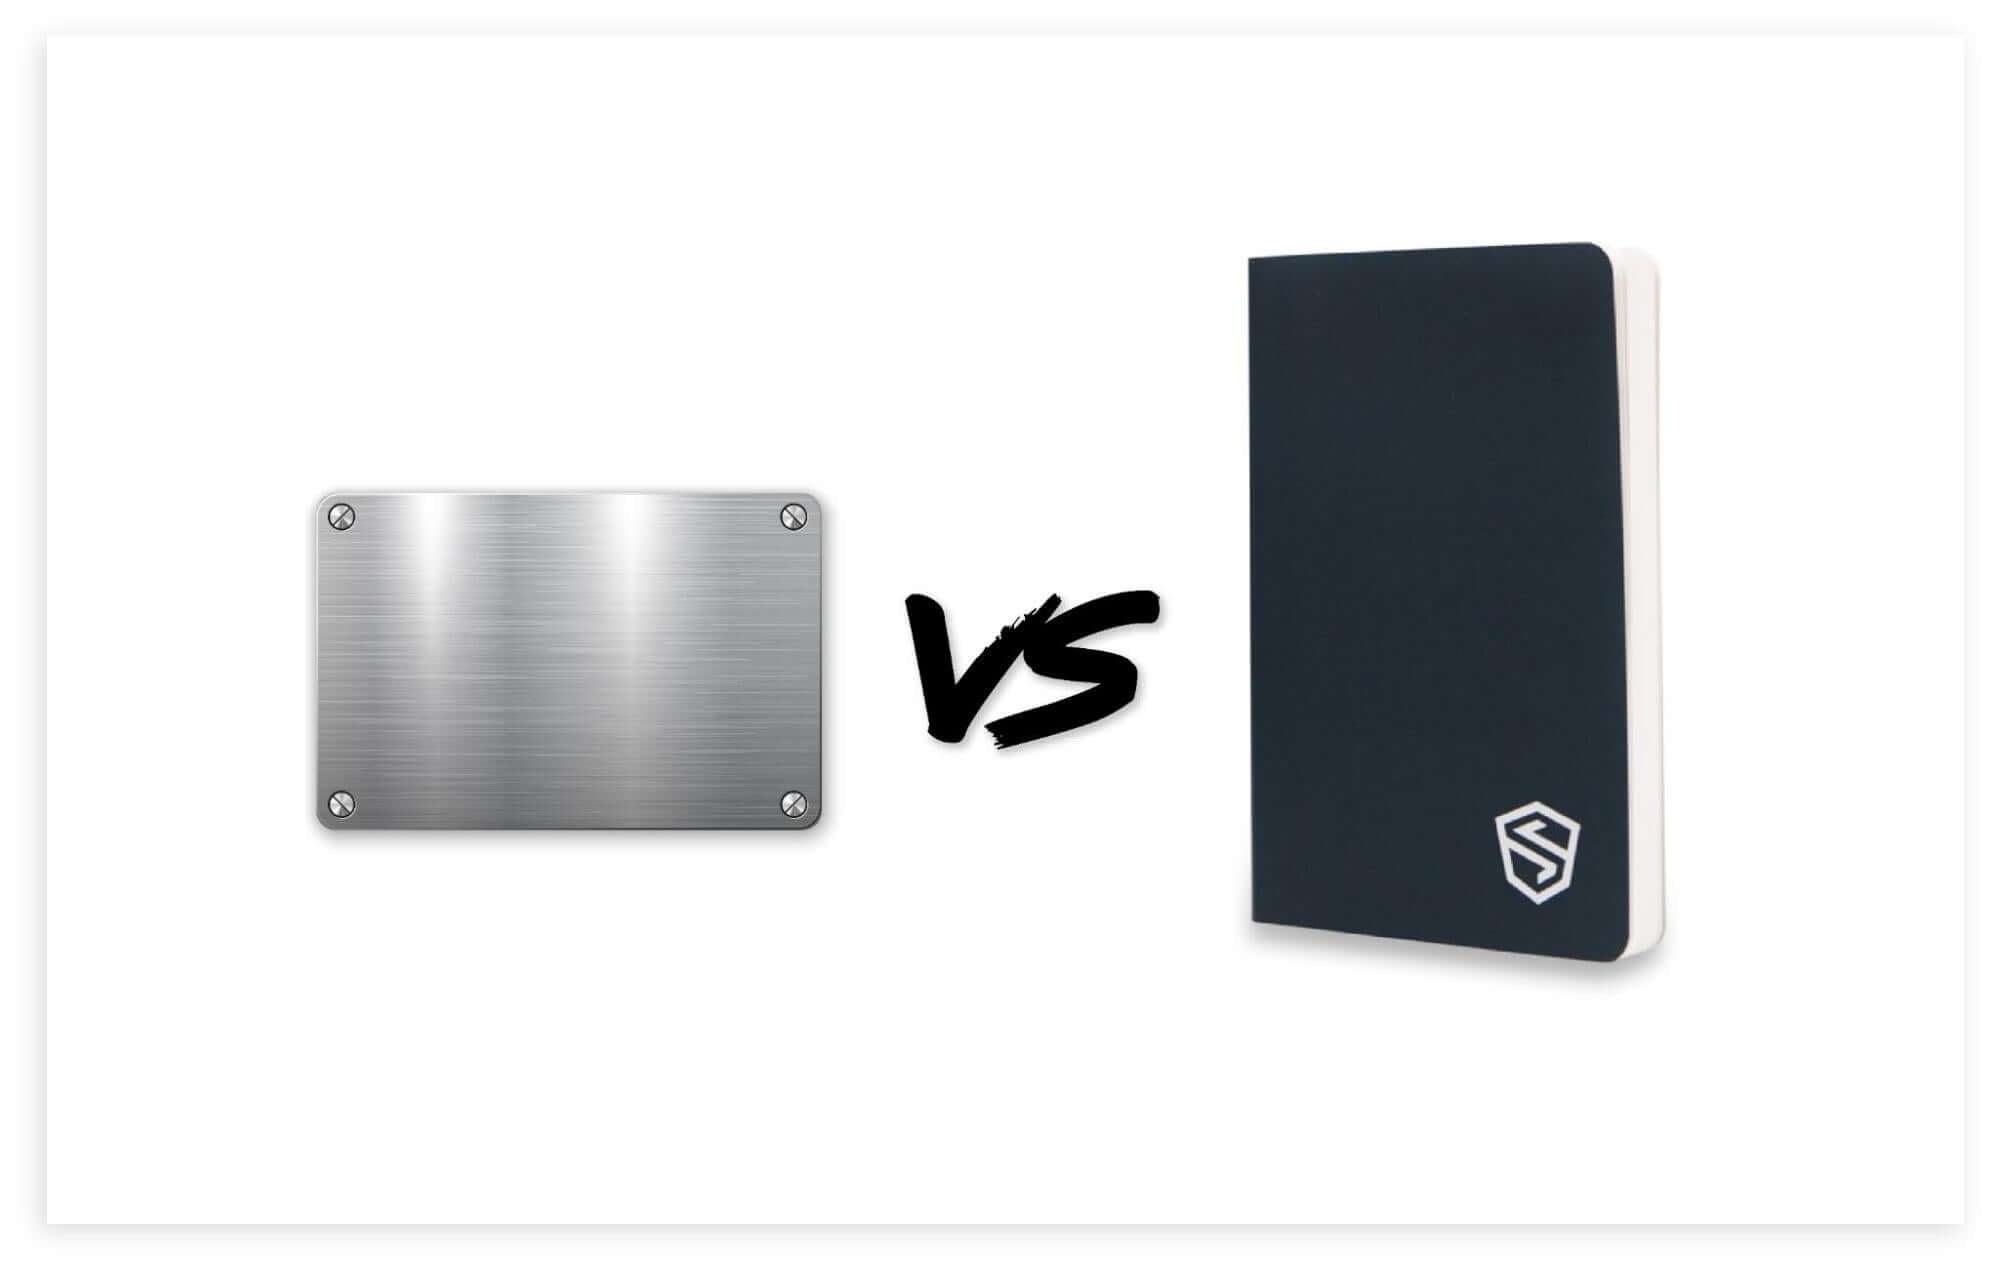 Metal Crypto Wallets Vs. The Shieldfolio Stonebook: Which Seed Storage Solution Comes Out On Top? by Shieldfolio